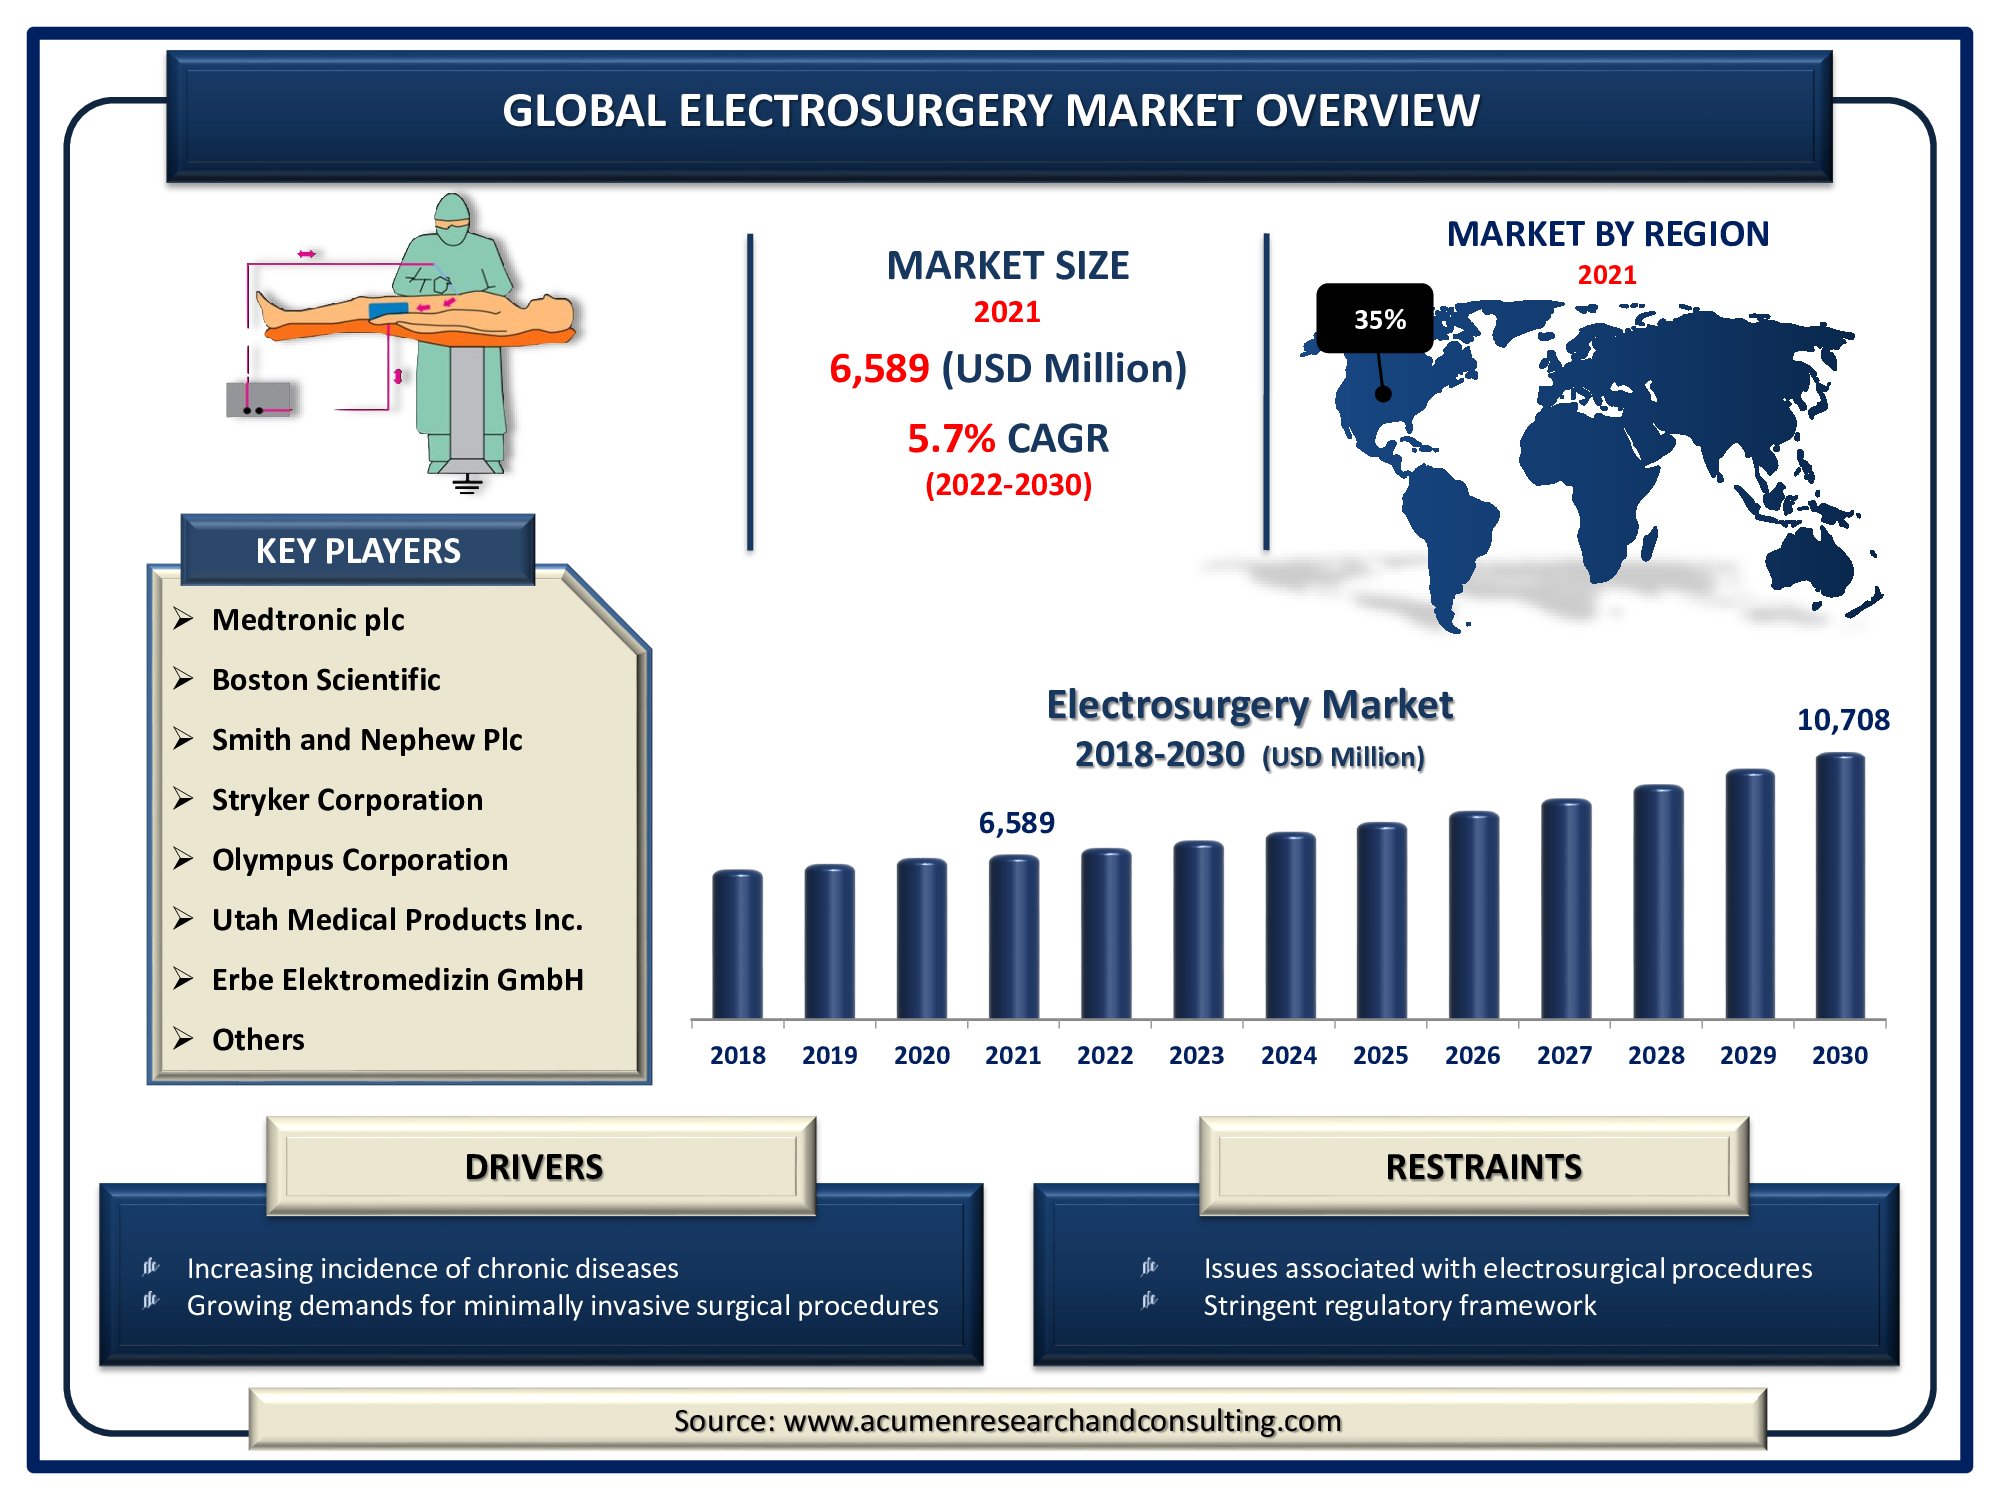 Electrosurgery Market Size Accounted for USD 6,589 Million in 2021 and is predicted to be worth USD 10,708 Million by 2030, with a CAGR of 5.7% during the Forthcoming Period from 2022 to 2030.